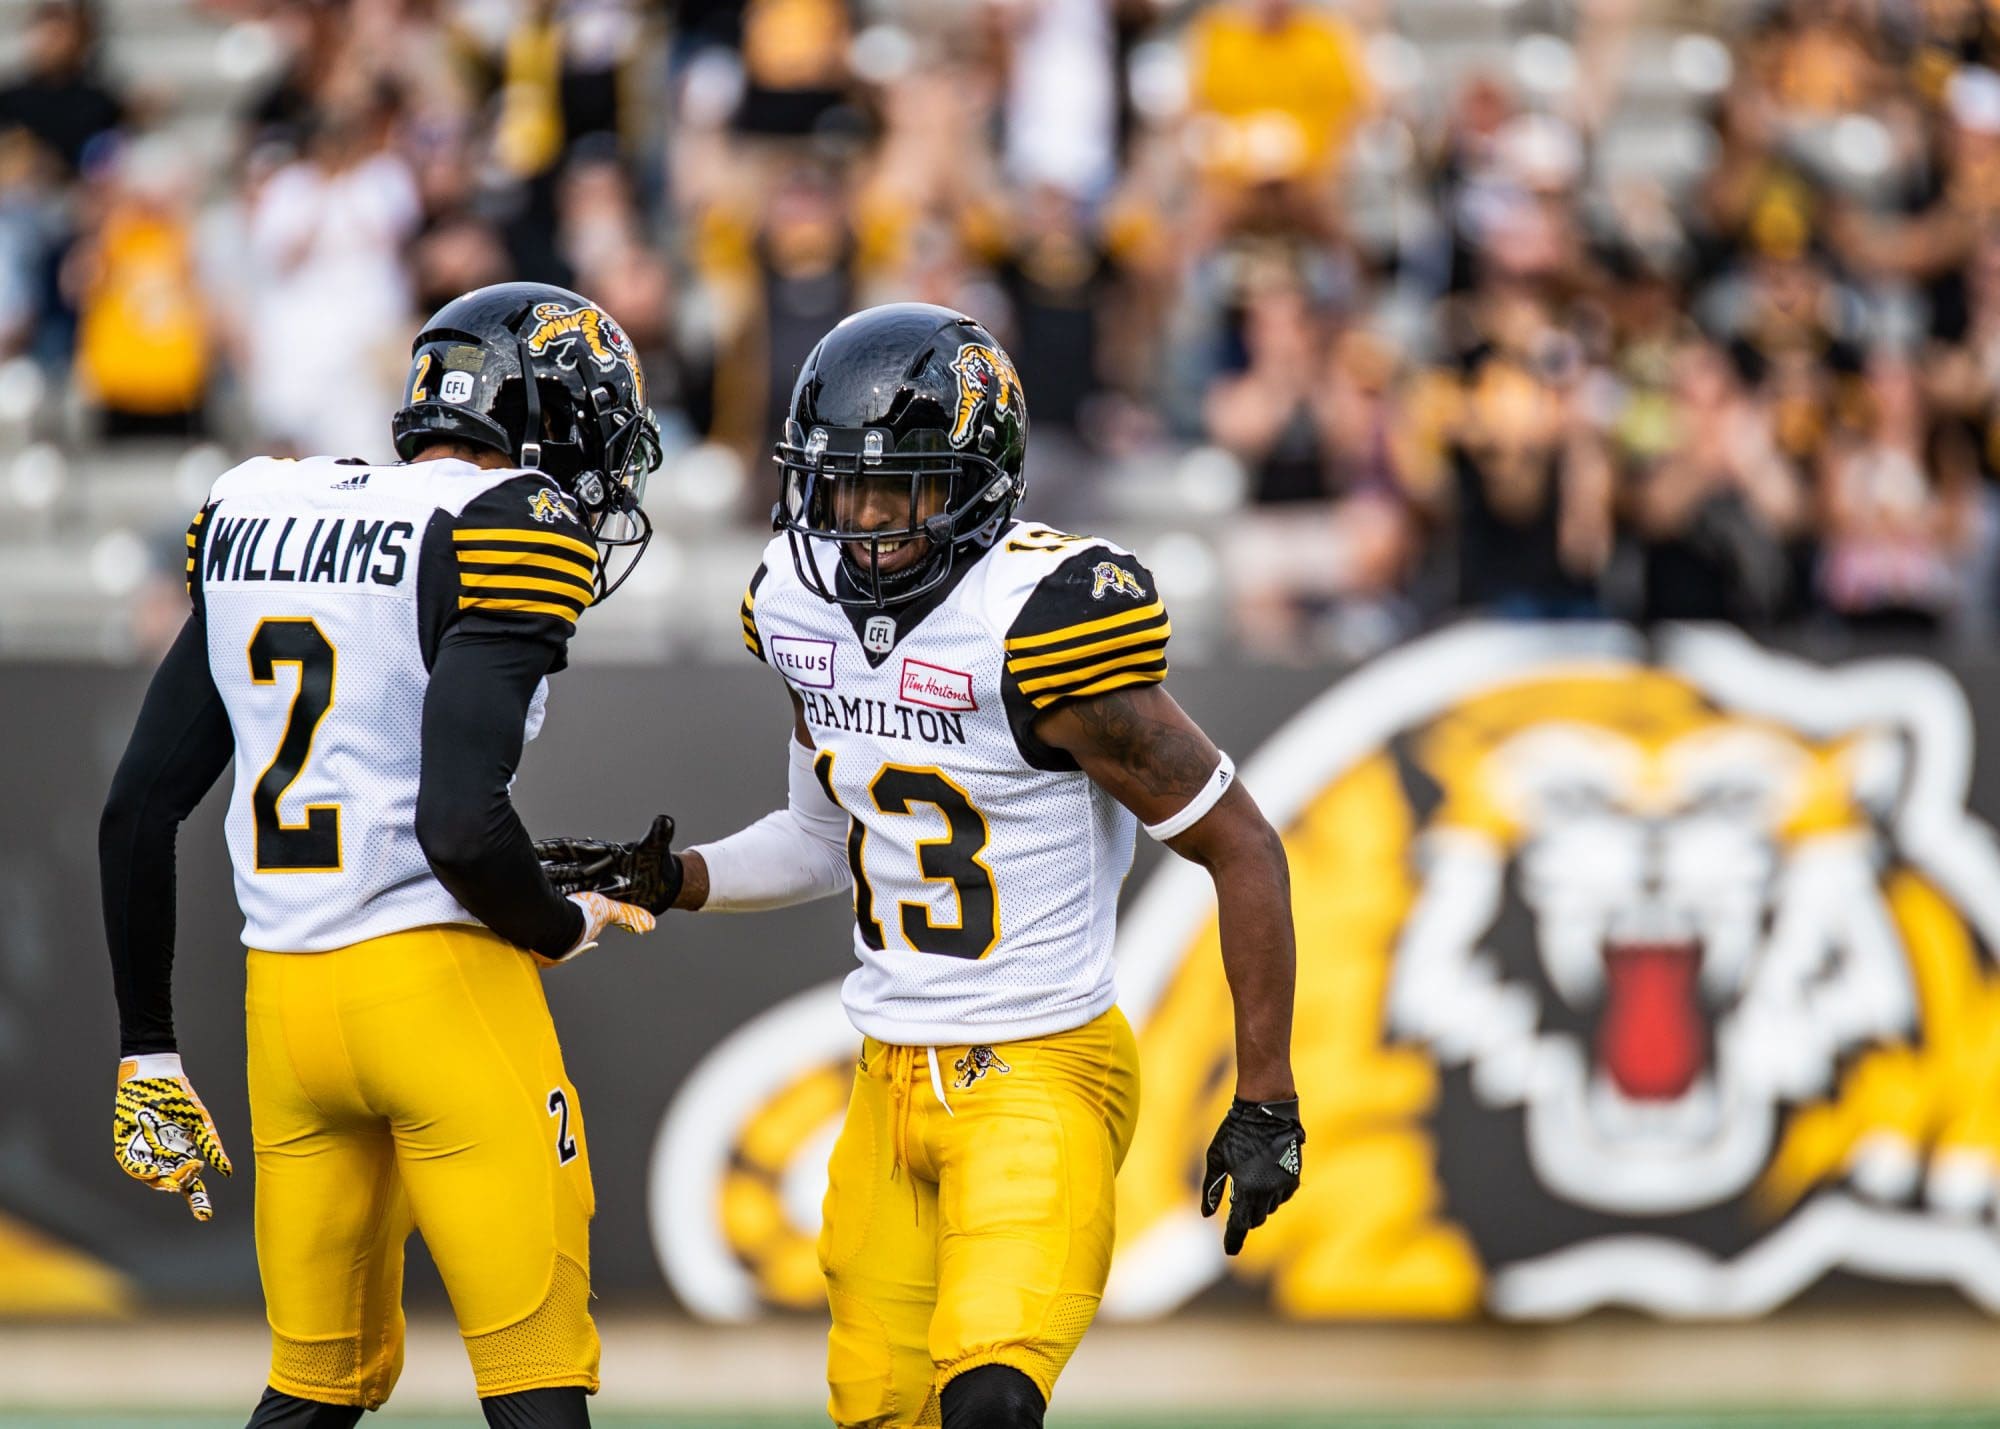 HAMILTON, ON - JUL. 28, 2018: Chris Williams and Jalen Saunders of the Hamilton Tiger-Cats celebrate a fourth quarter touchdown.